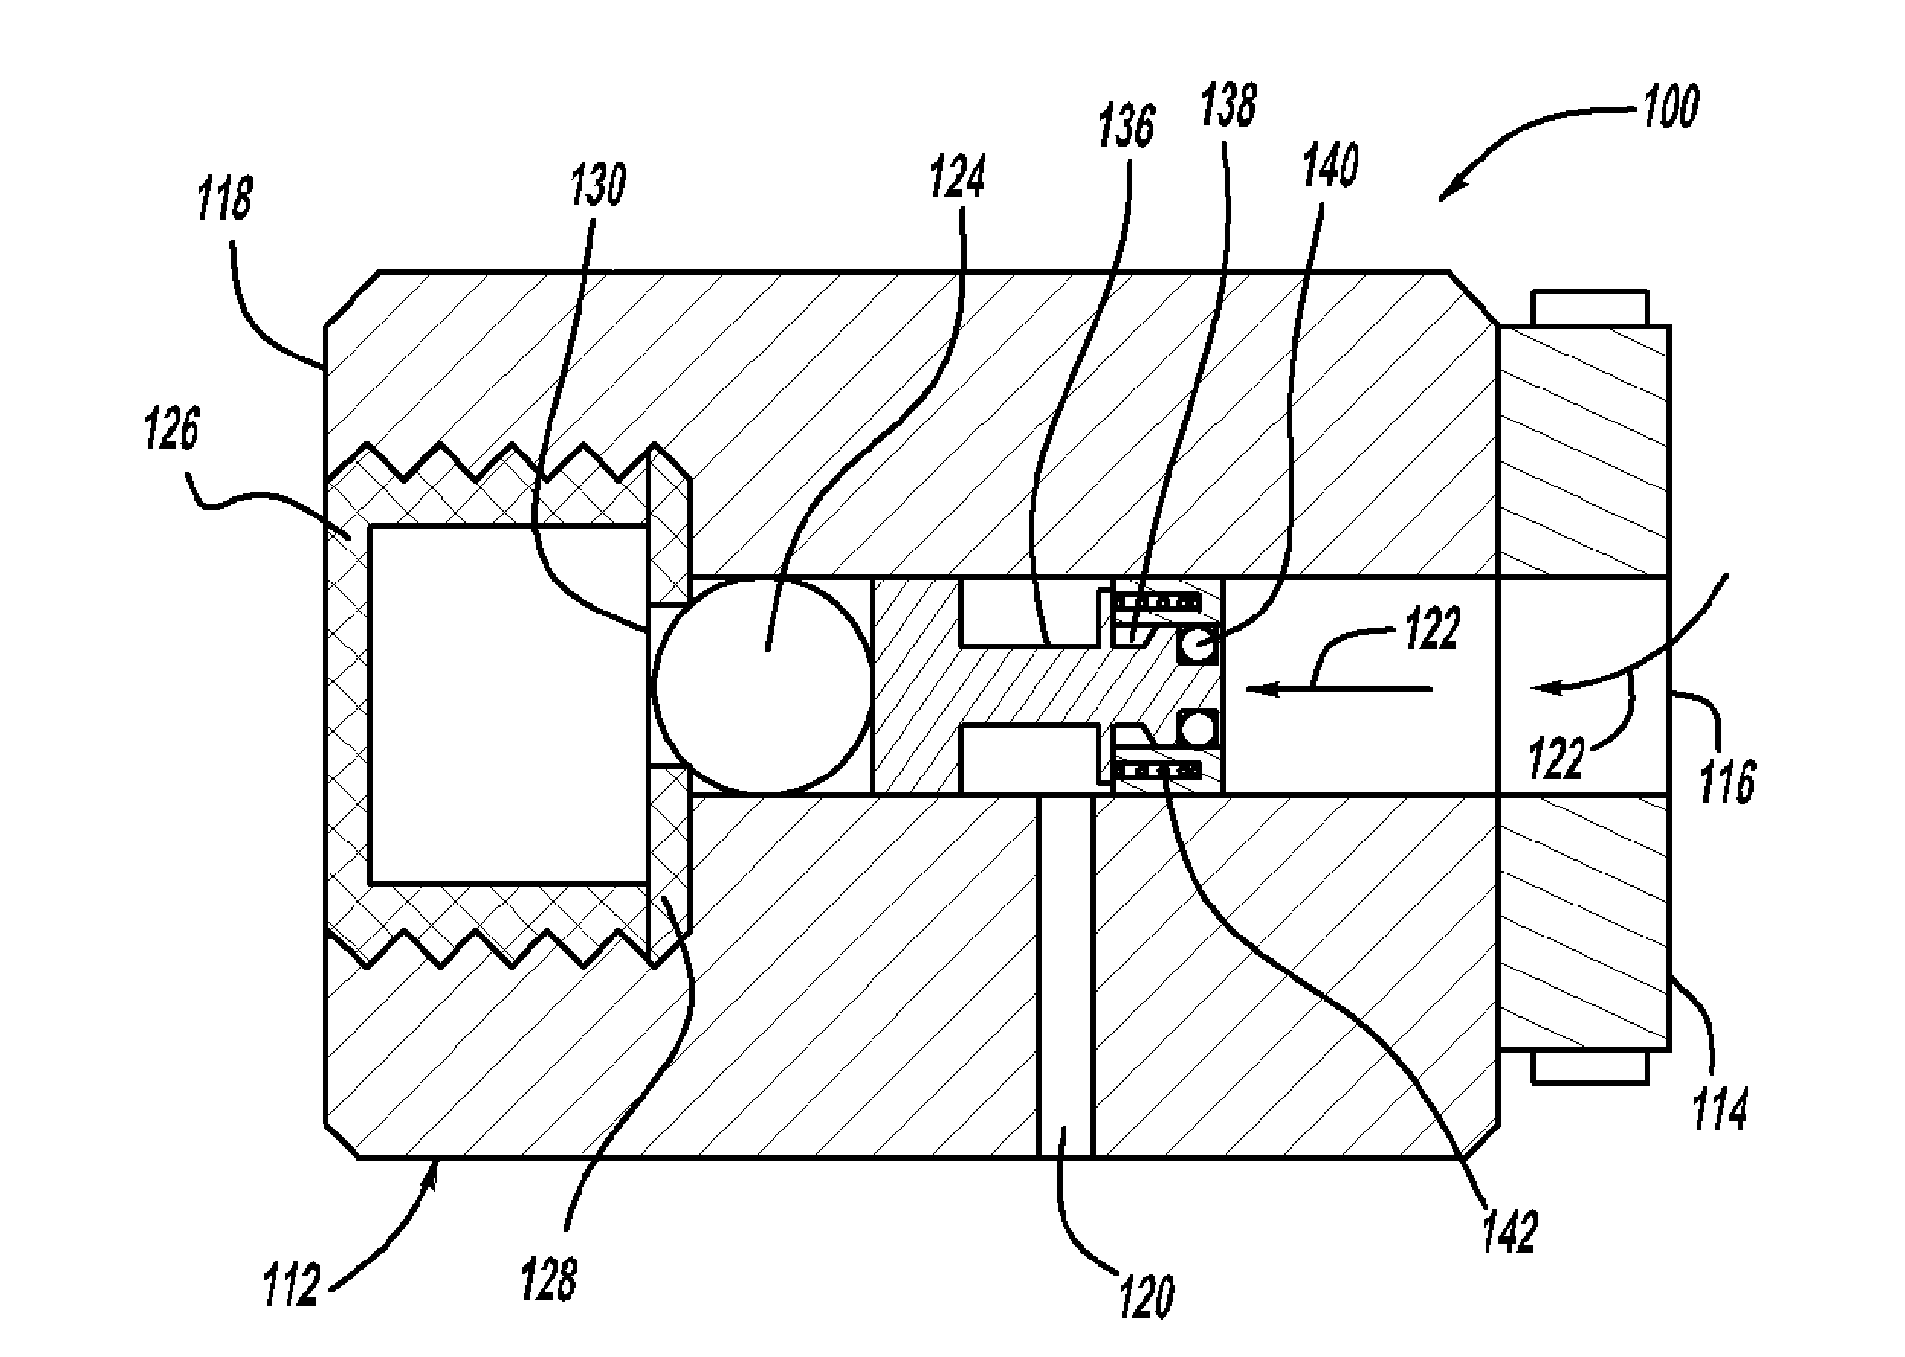 Thermal pressure relief device with expansion activation